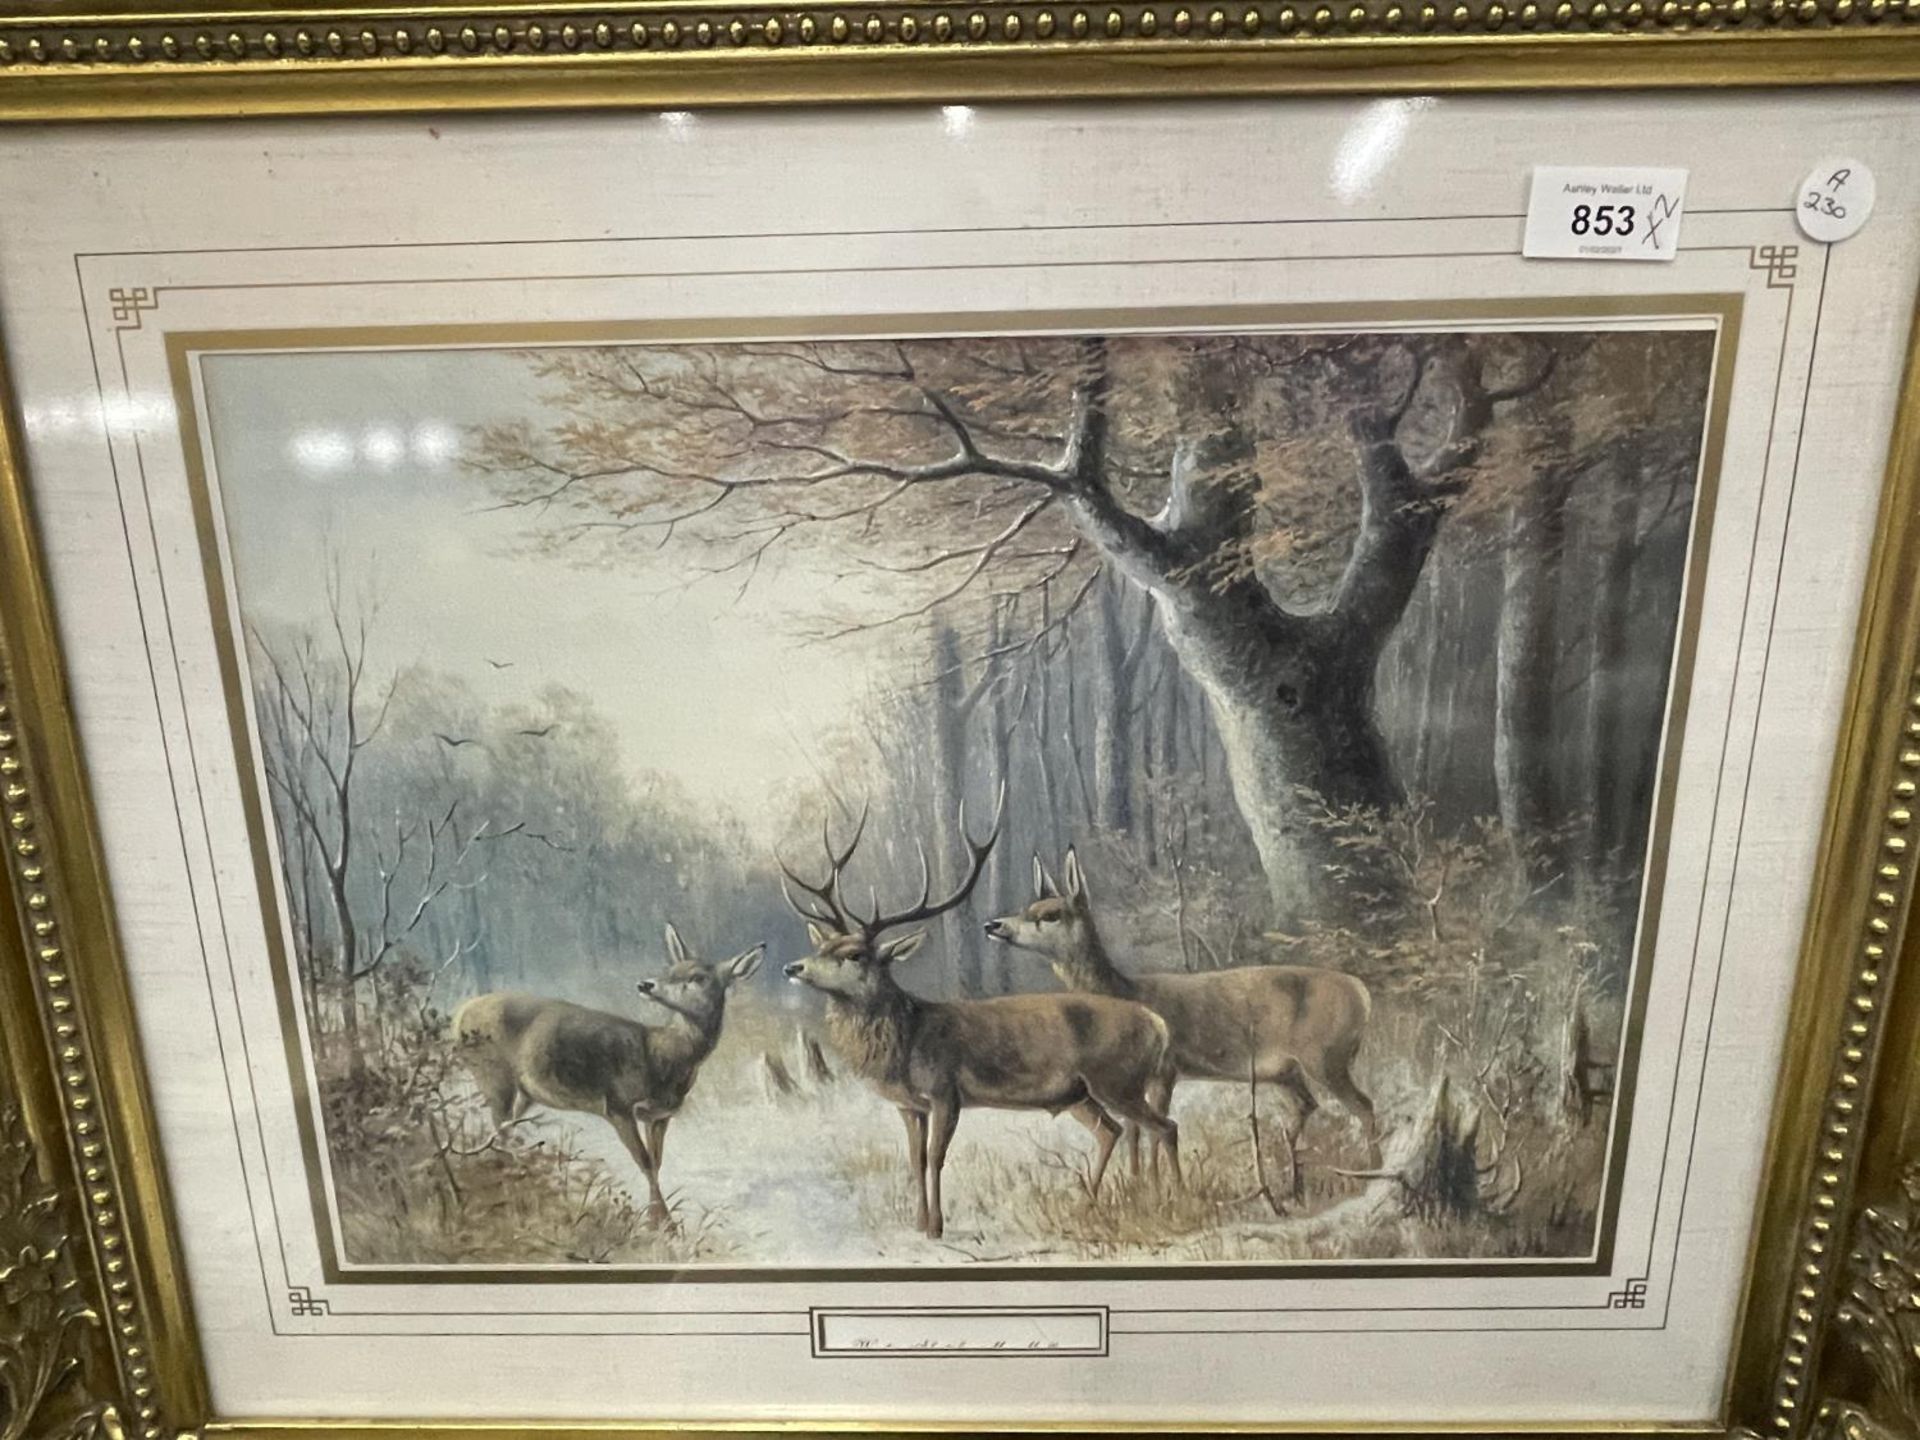 TWO GILT FRAMED PRINTS ONE OF DEER IN A WOODLAND SETTING, THE OTHER A HUNTING SCENE - Image 3 of 3